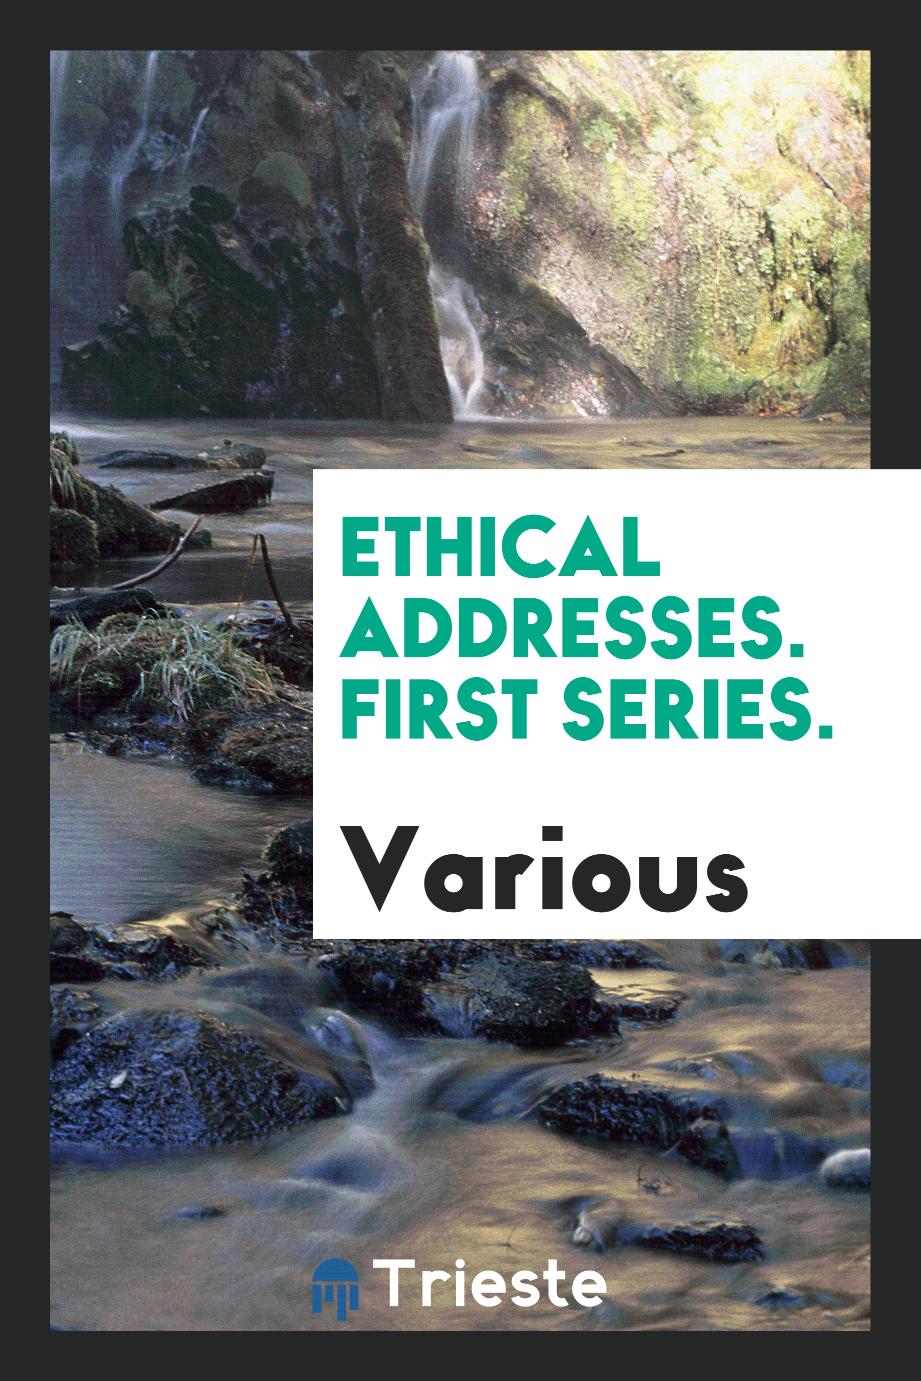 Ethical addresses. First series.